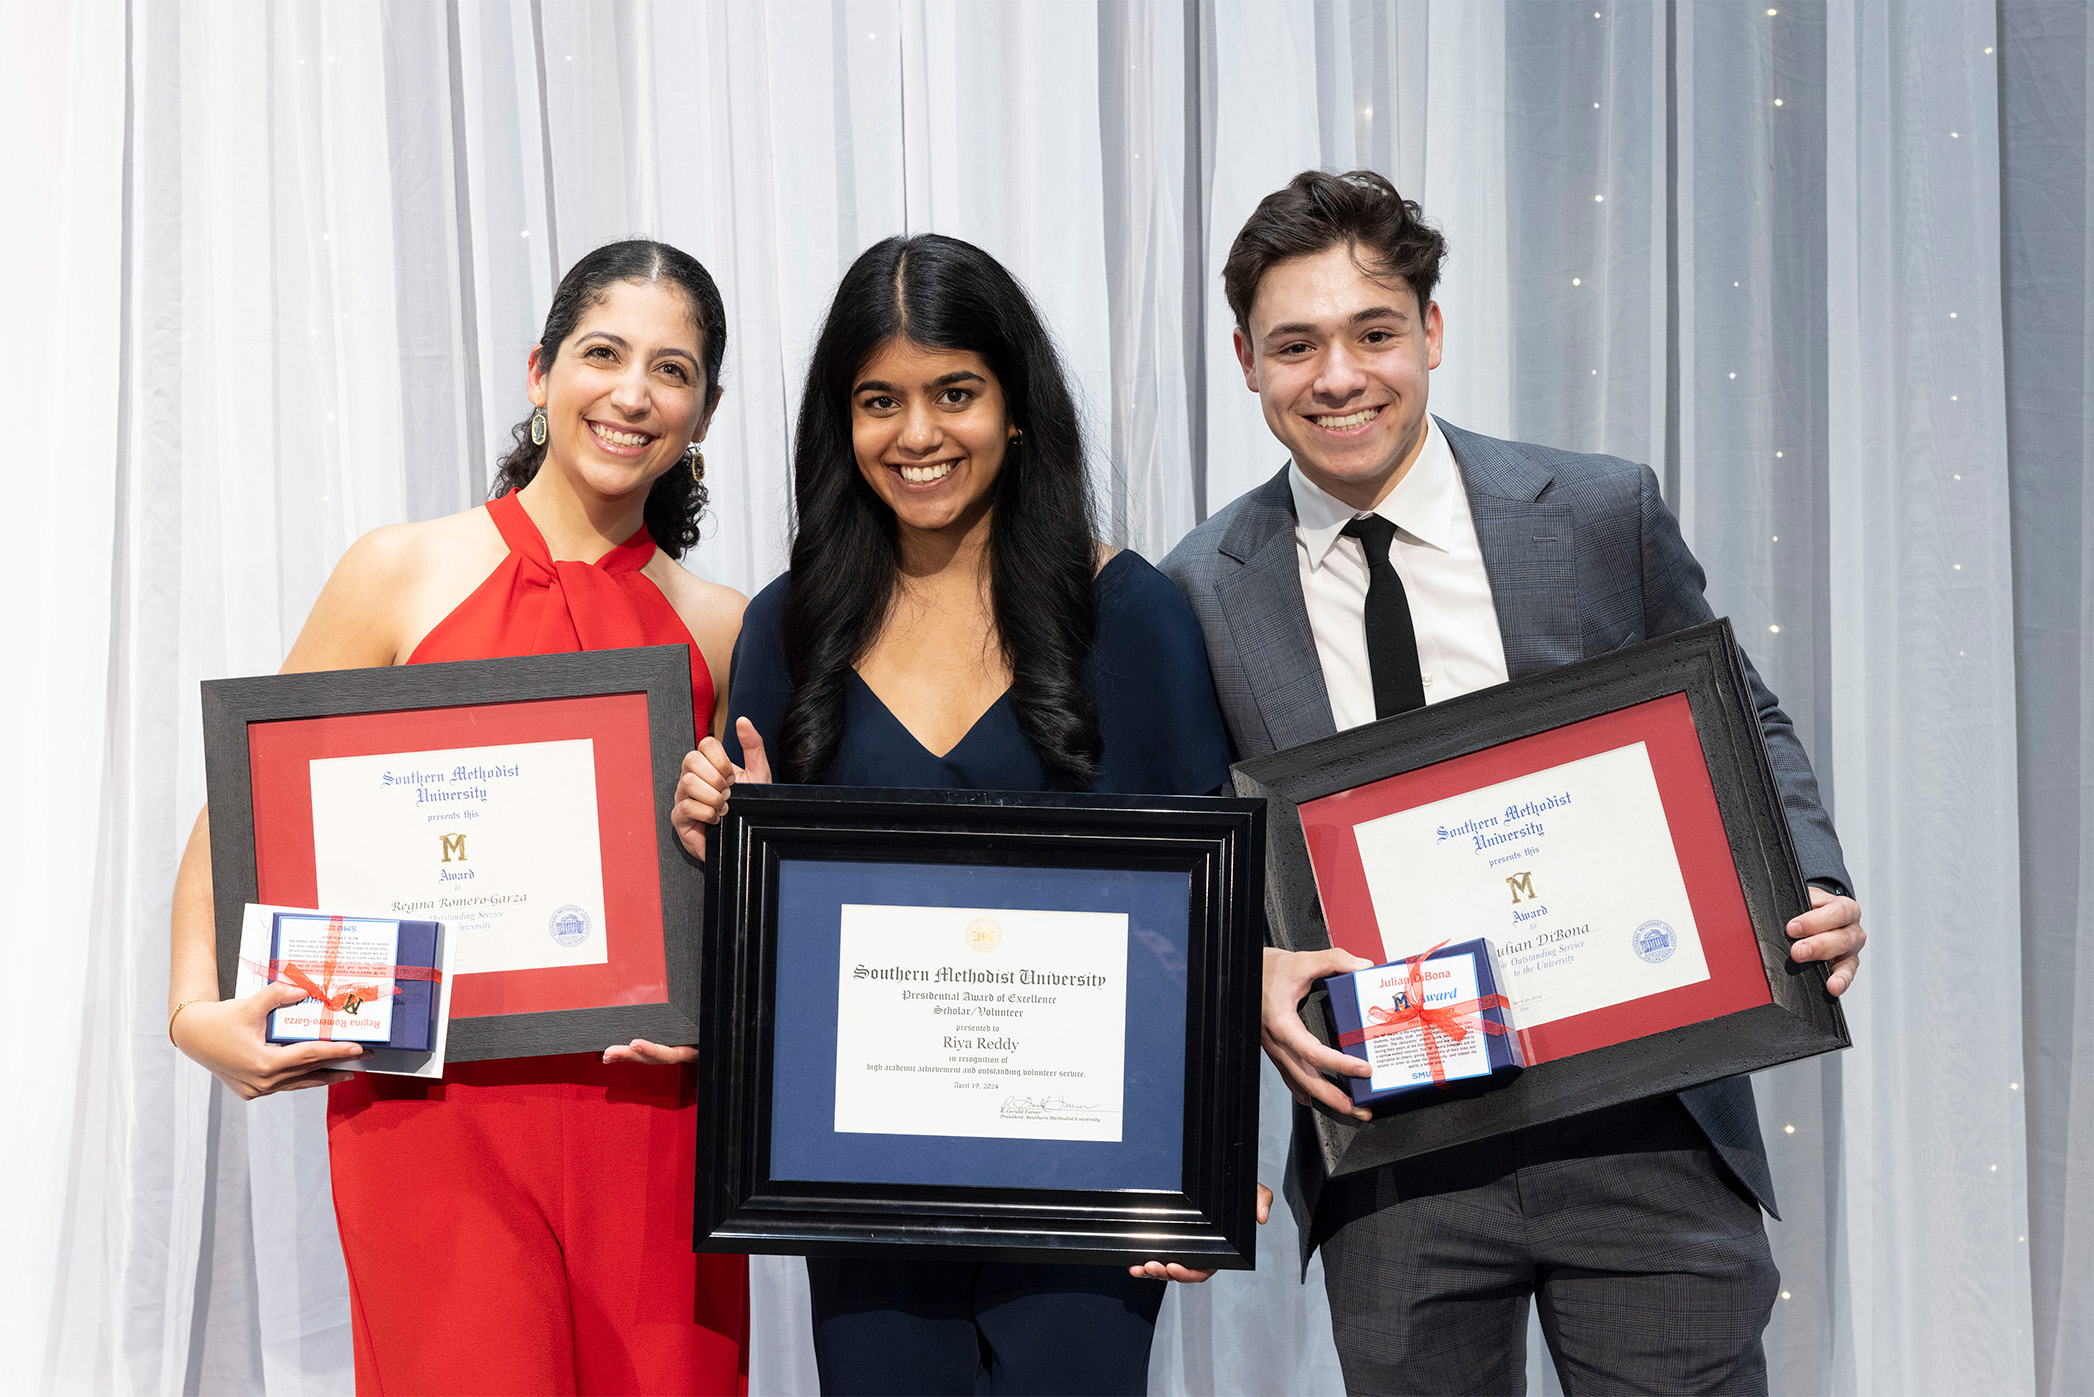 three smiling students holding framed certificates in front of white shear curtain on stage